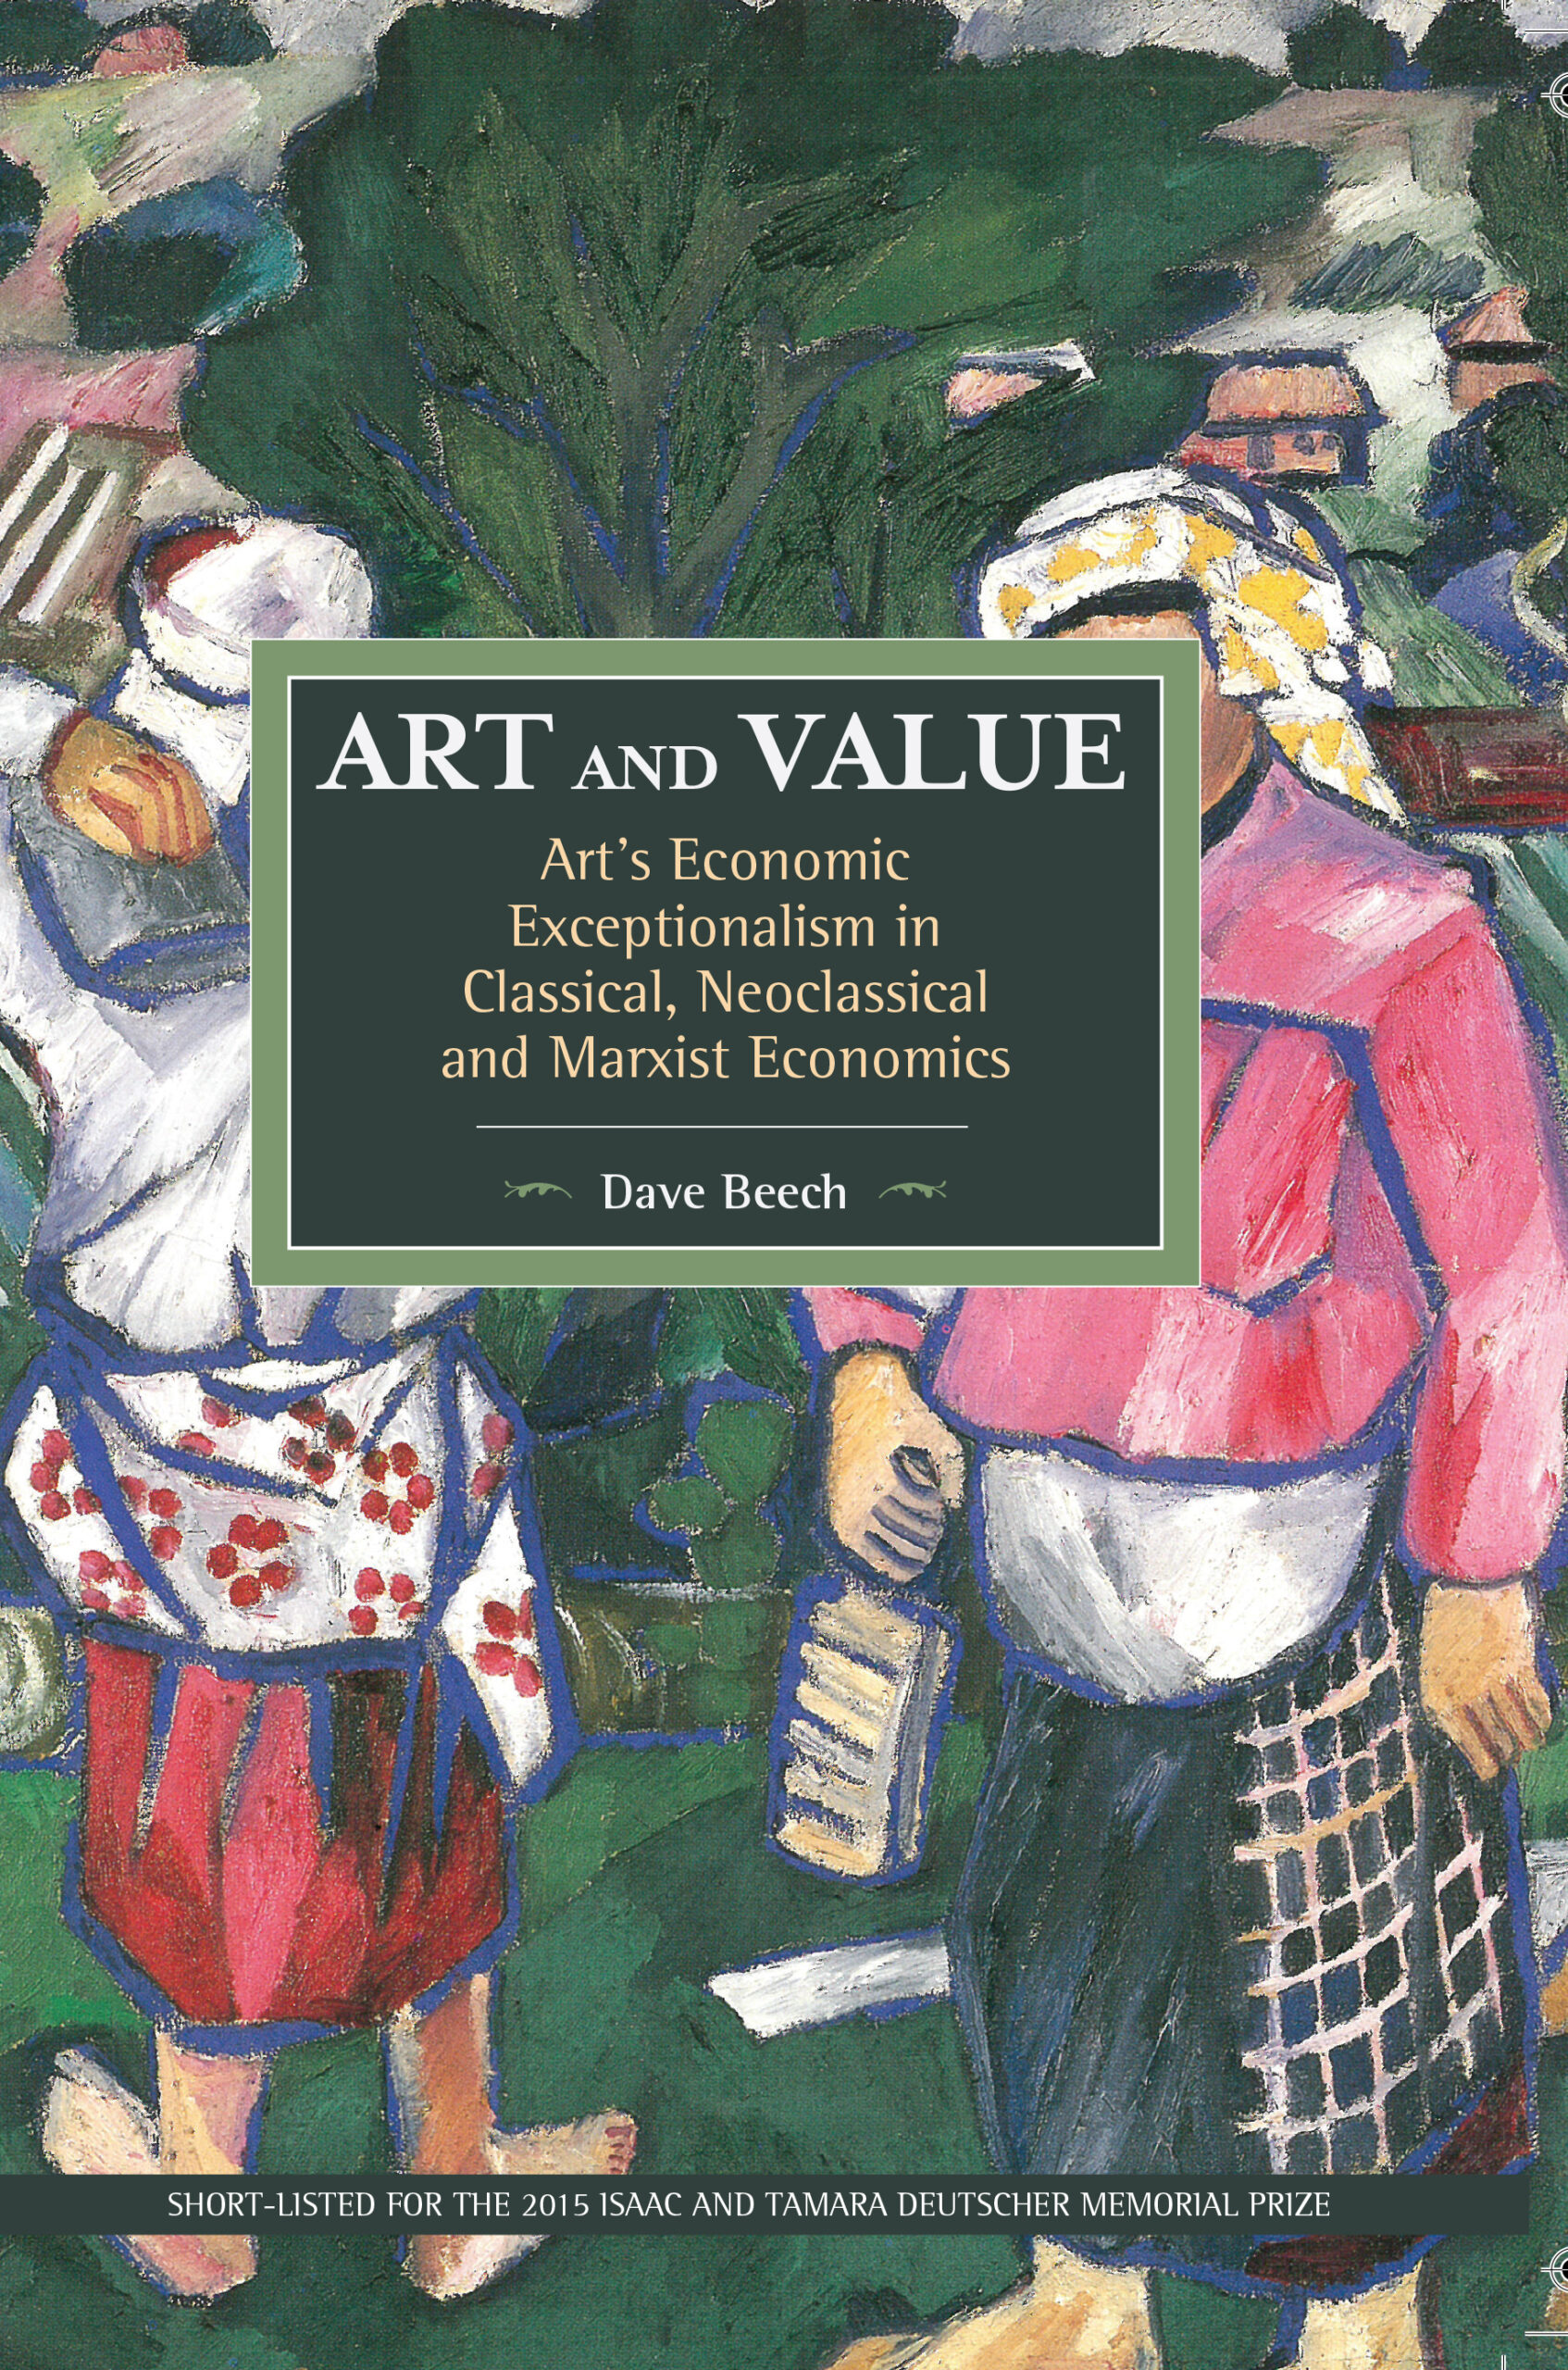 Art and Value by Dave Beech